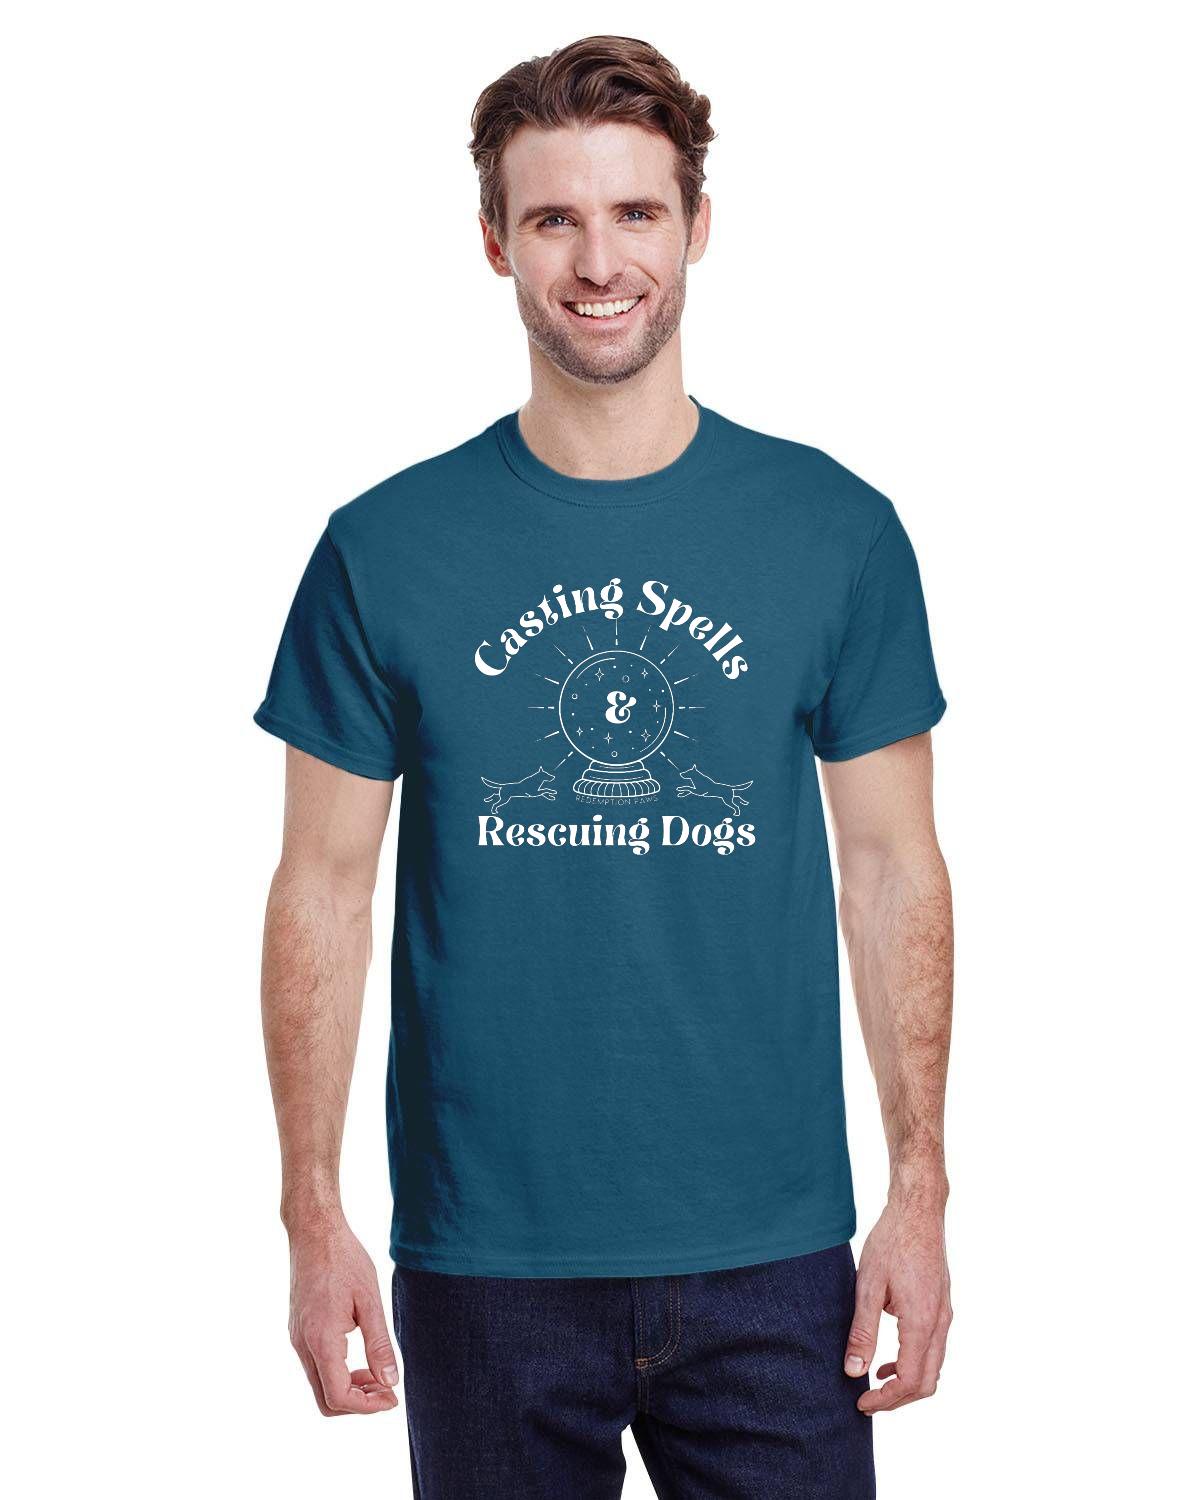 Casting Spells and Rescuing Dogs Crystal Ball T-Shirt